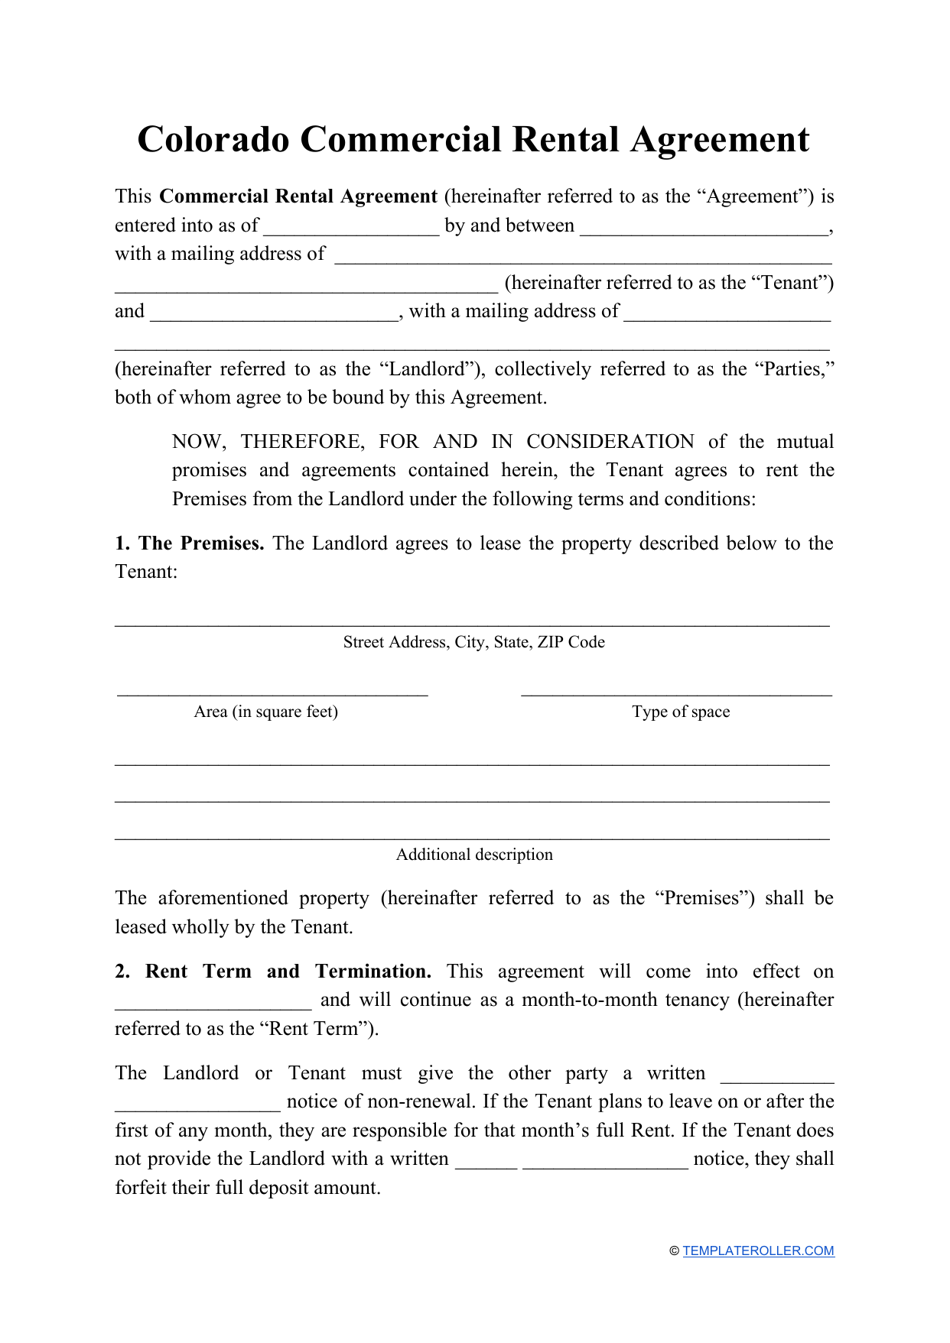 Commercial Rental Agreement Template - Colorado, Page 1